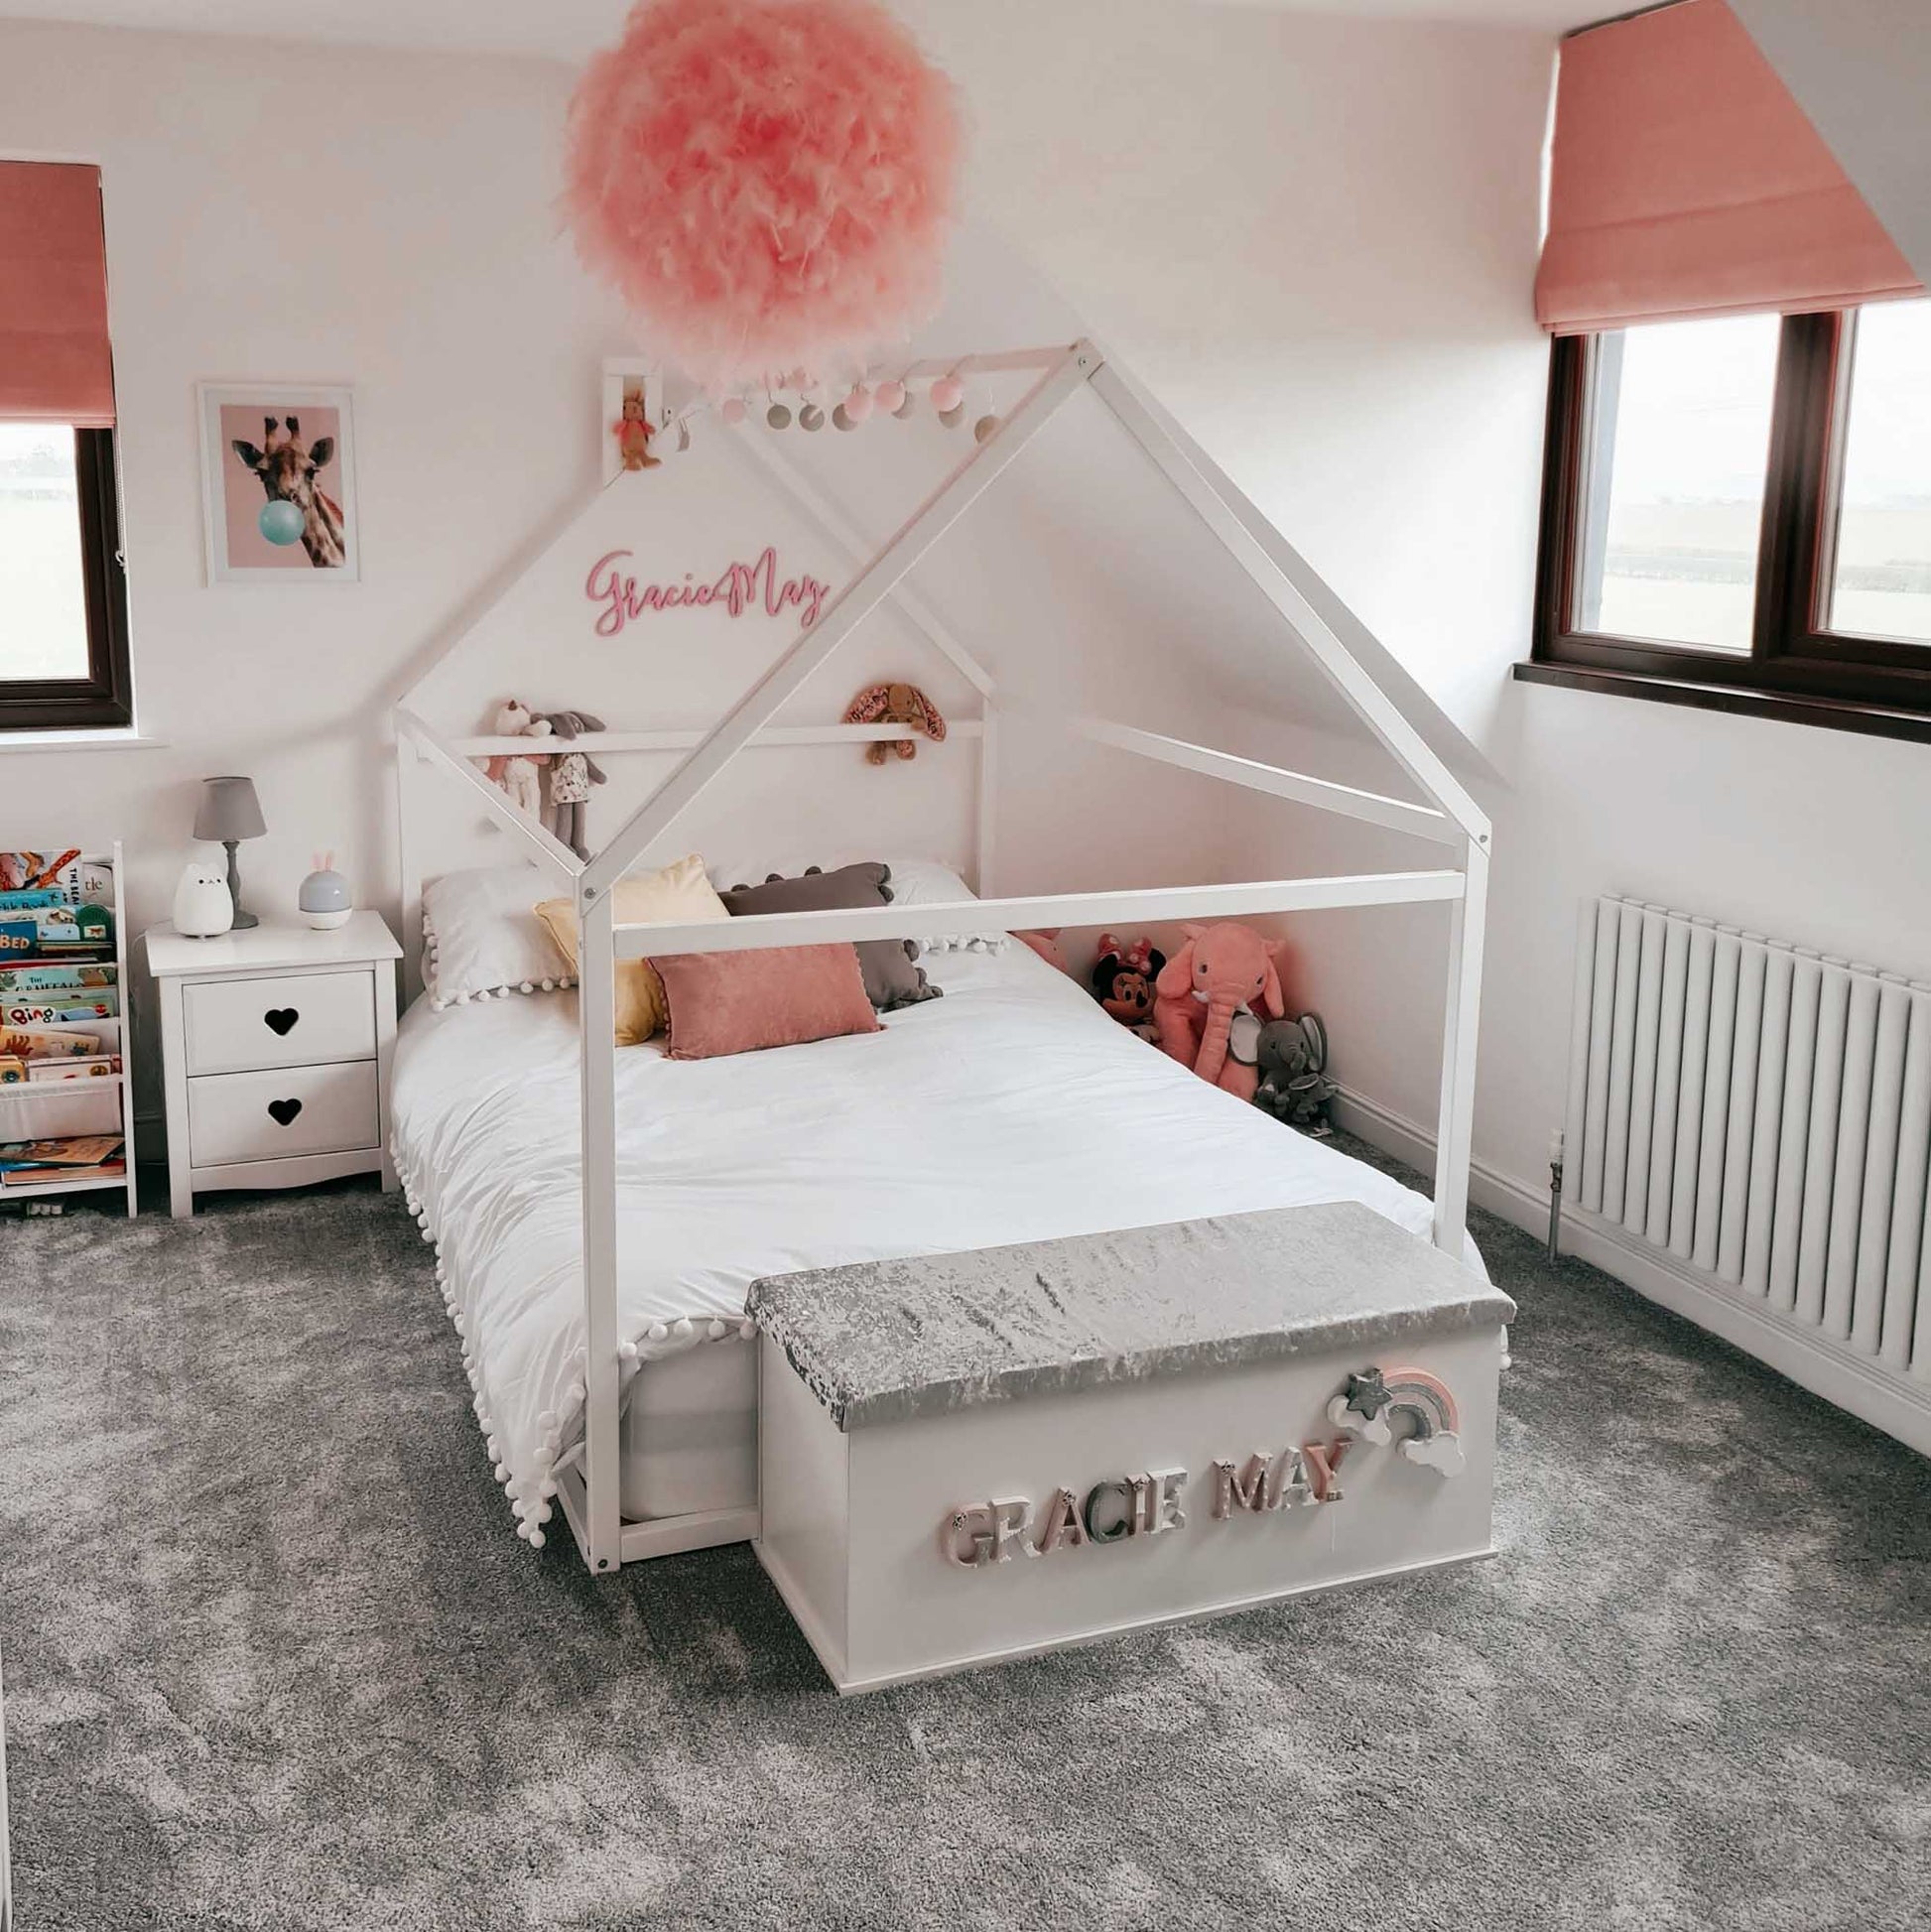 A cozy sleep haven adorned with pink pom poms, featuring a Sweet Home From Wood's Wooden zero-clearance house bed draped with a house-shaped canopy.